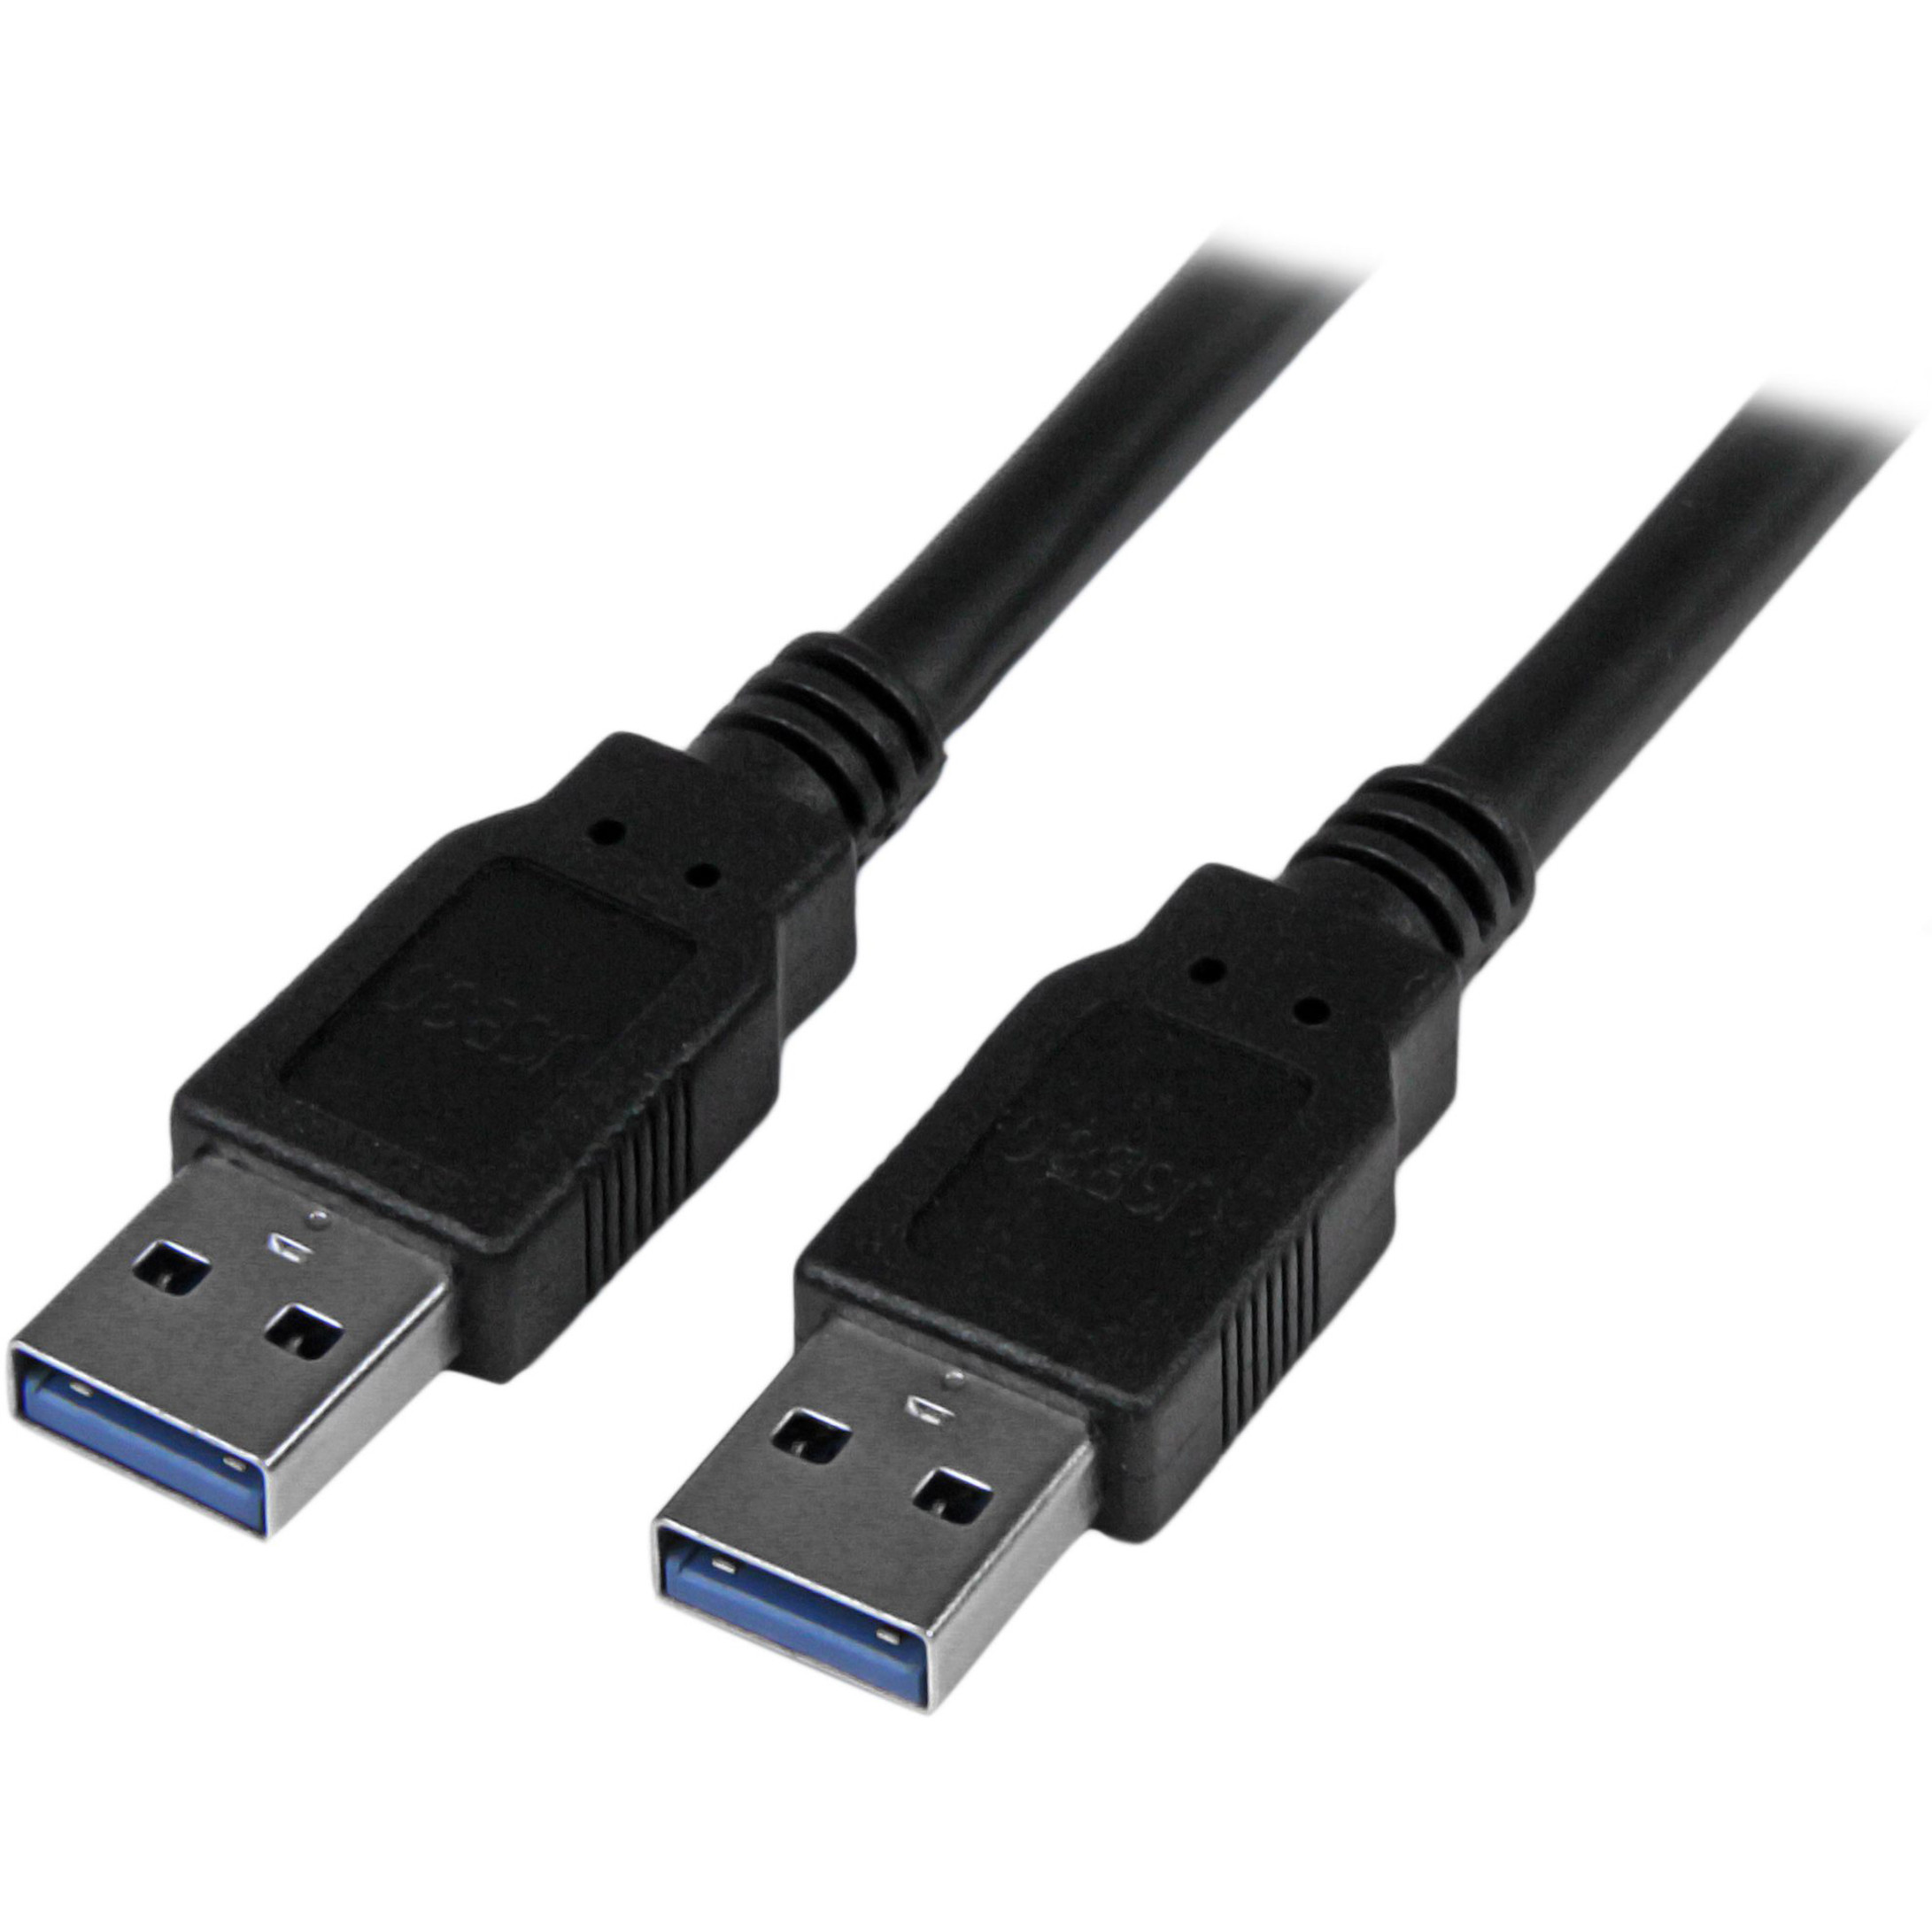 Startech .com 3m 10 ft USB 3.0 CableA to AM/MLong USB 3.0 CableUSB 3.1 Gen 1 (5 Gbps)Connect USB 3.0 USB-A devices to a USB hu… USB3SAA3MBK